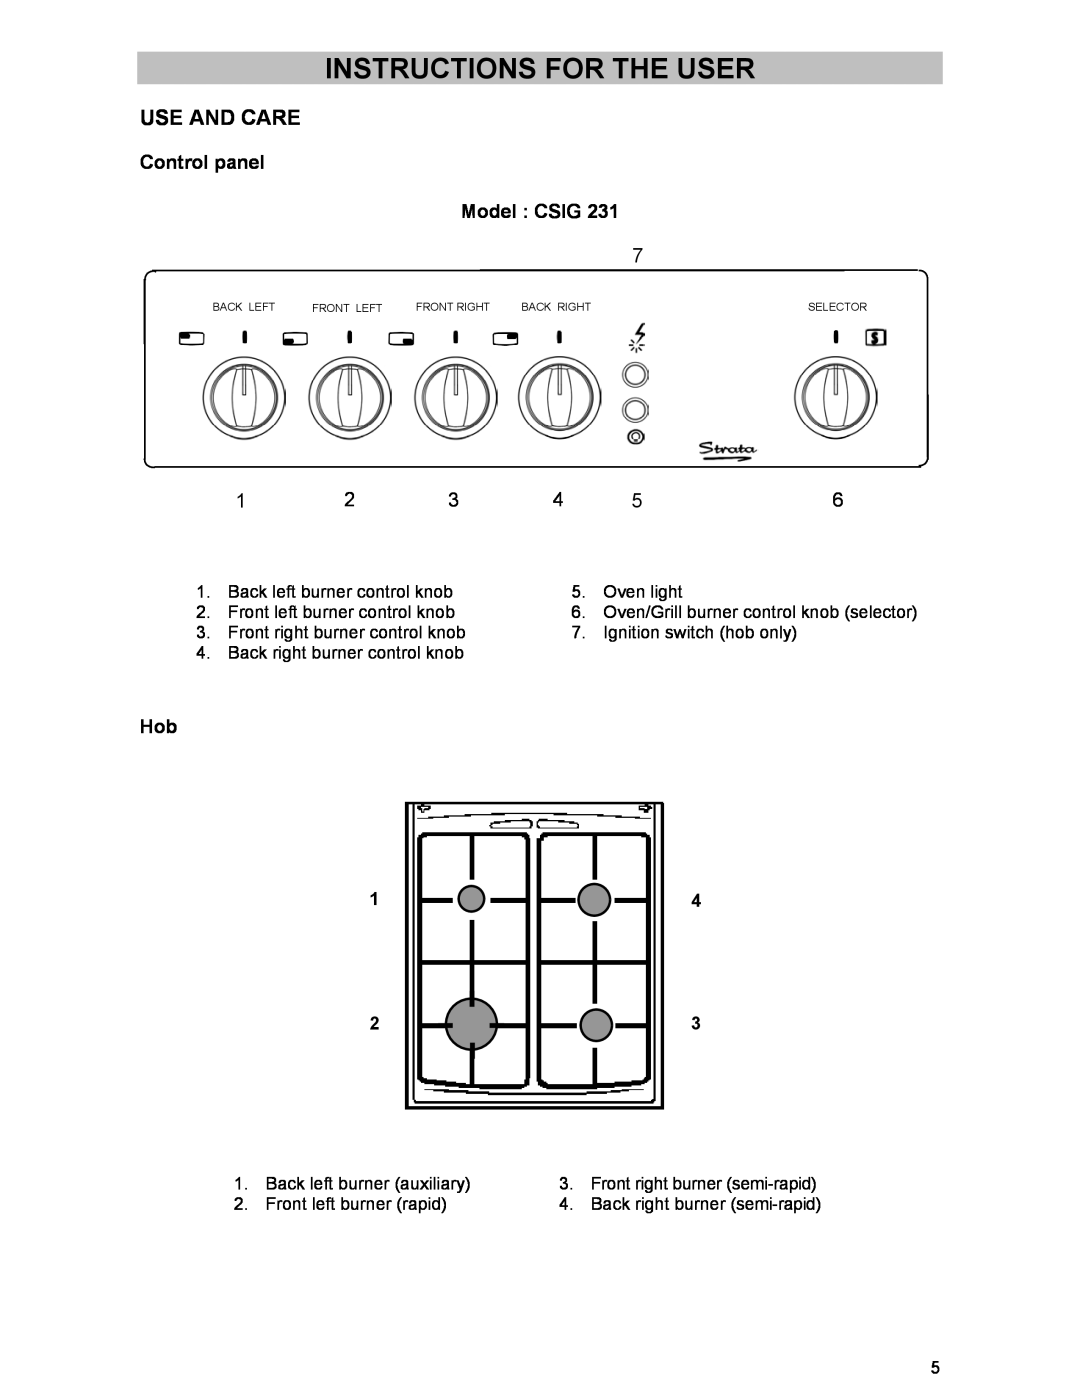 Electrolux SIG 233 manual Instructions For The User, Use And Care, Control panel Model CSIG 